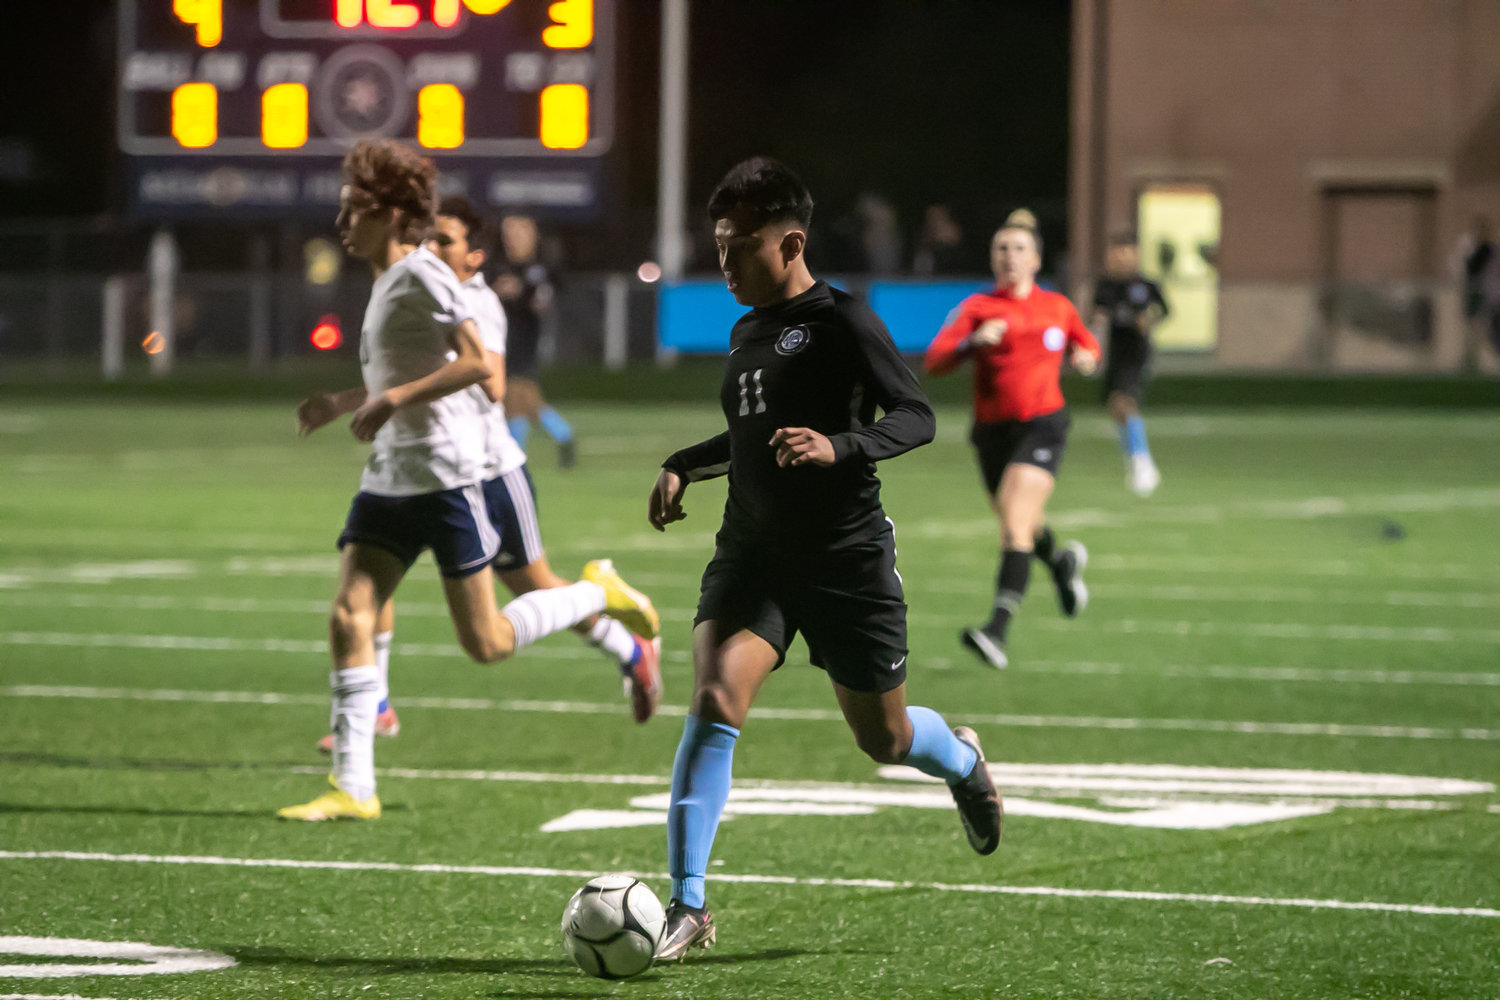 Jose Dominguez dribbles up the field during Tuesday's match between Paetow and Lamar at the Spring Woods football field.